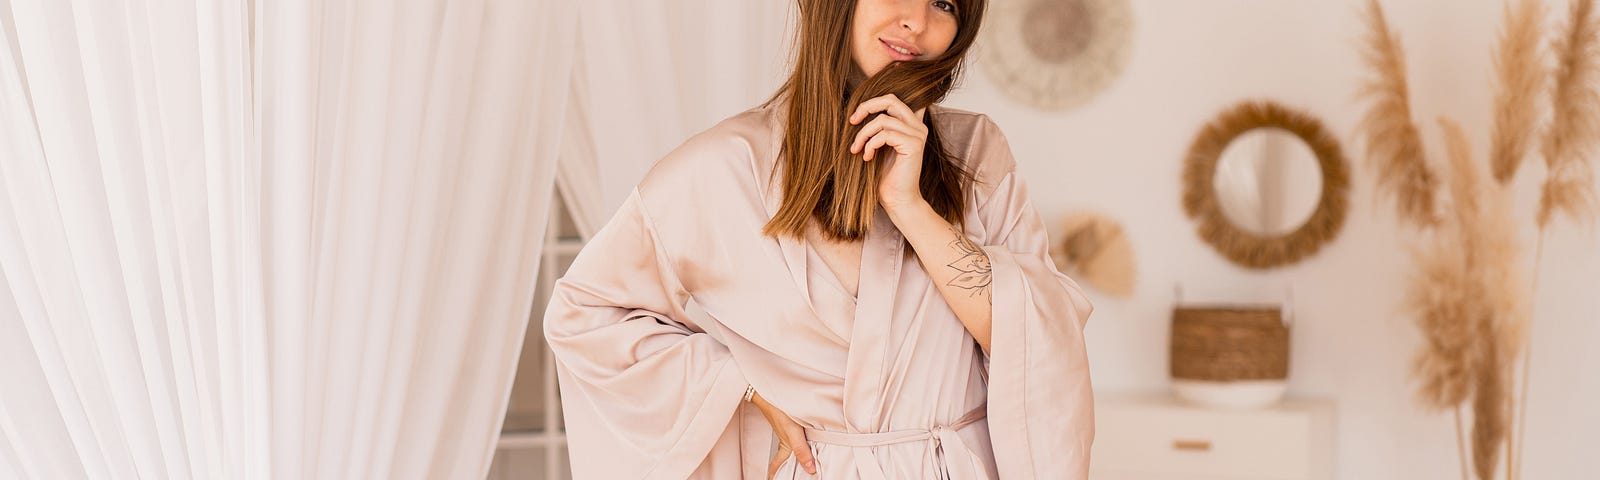 This photo shows an attractive woman in a robe in a bedroom.